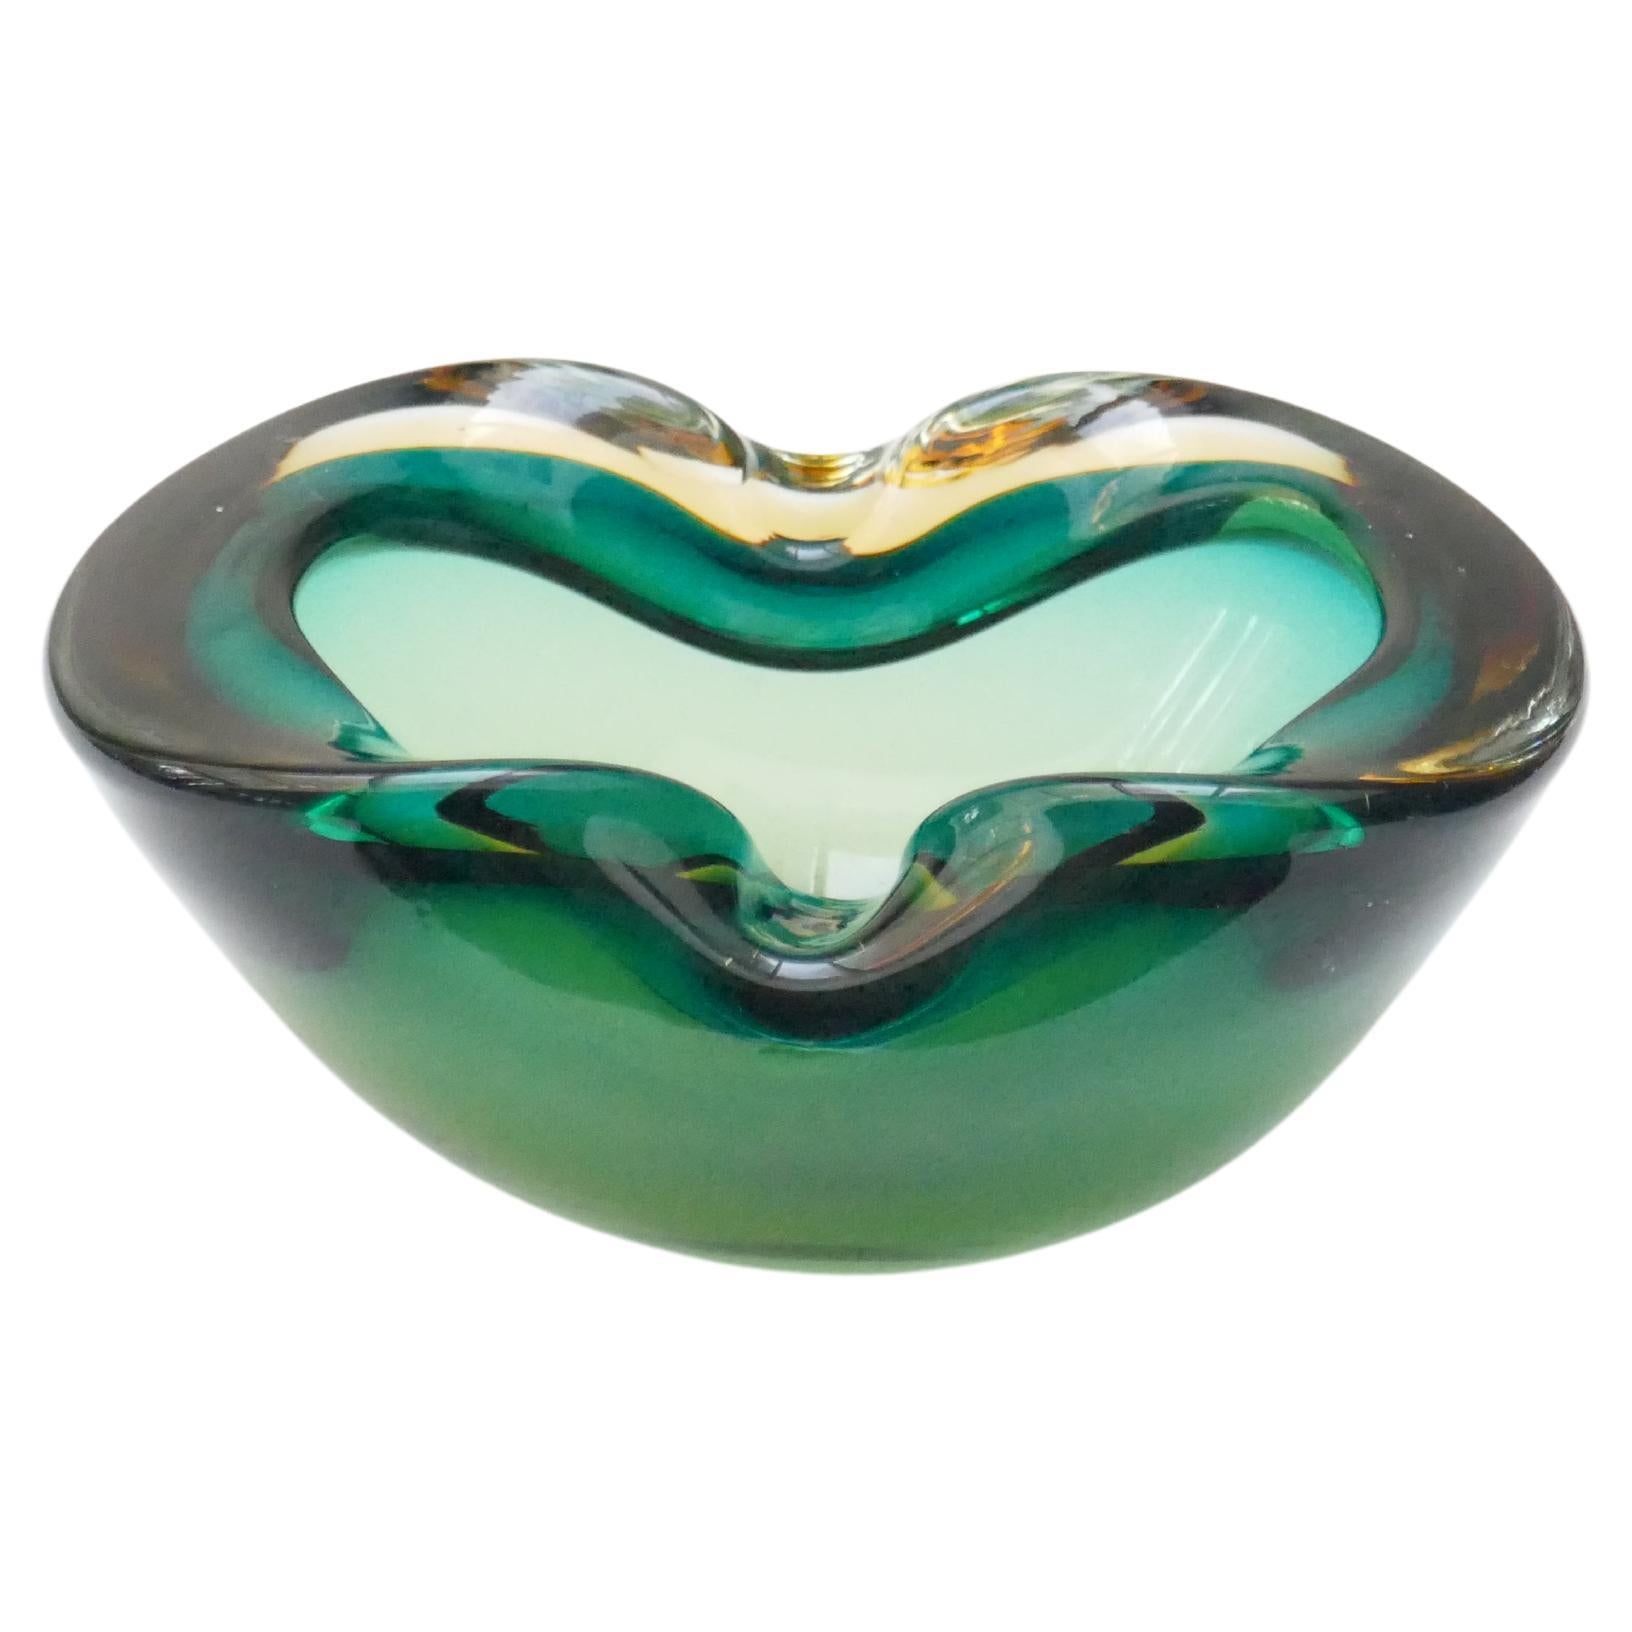 Murano Sommerso Green and Amber Art Glass Bowl, Italy, 1960s